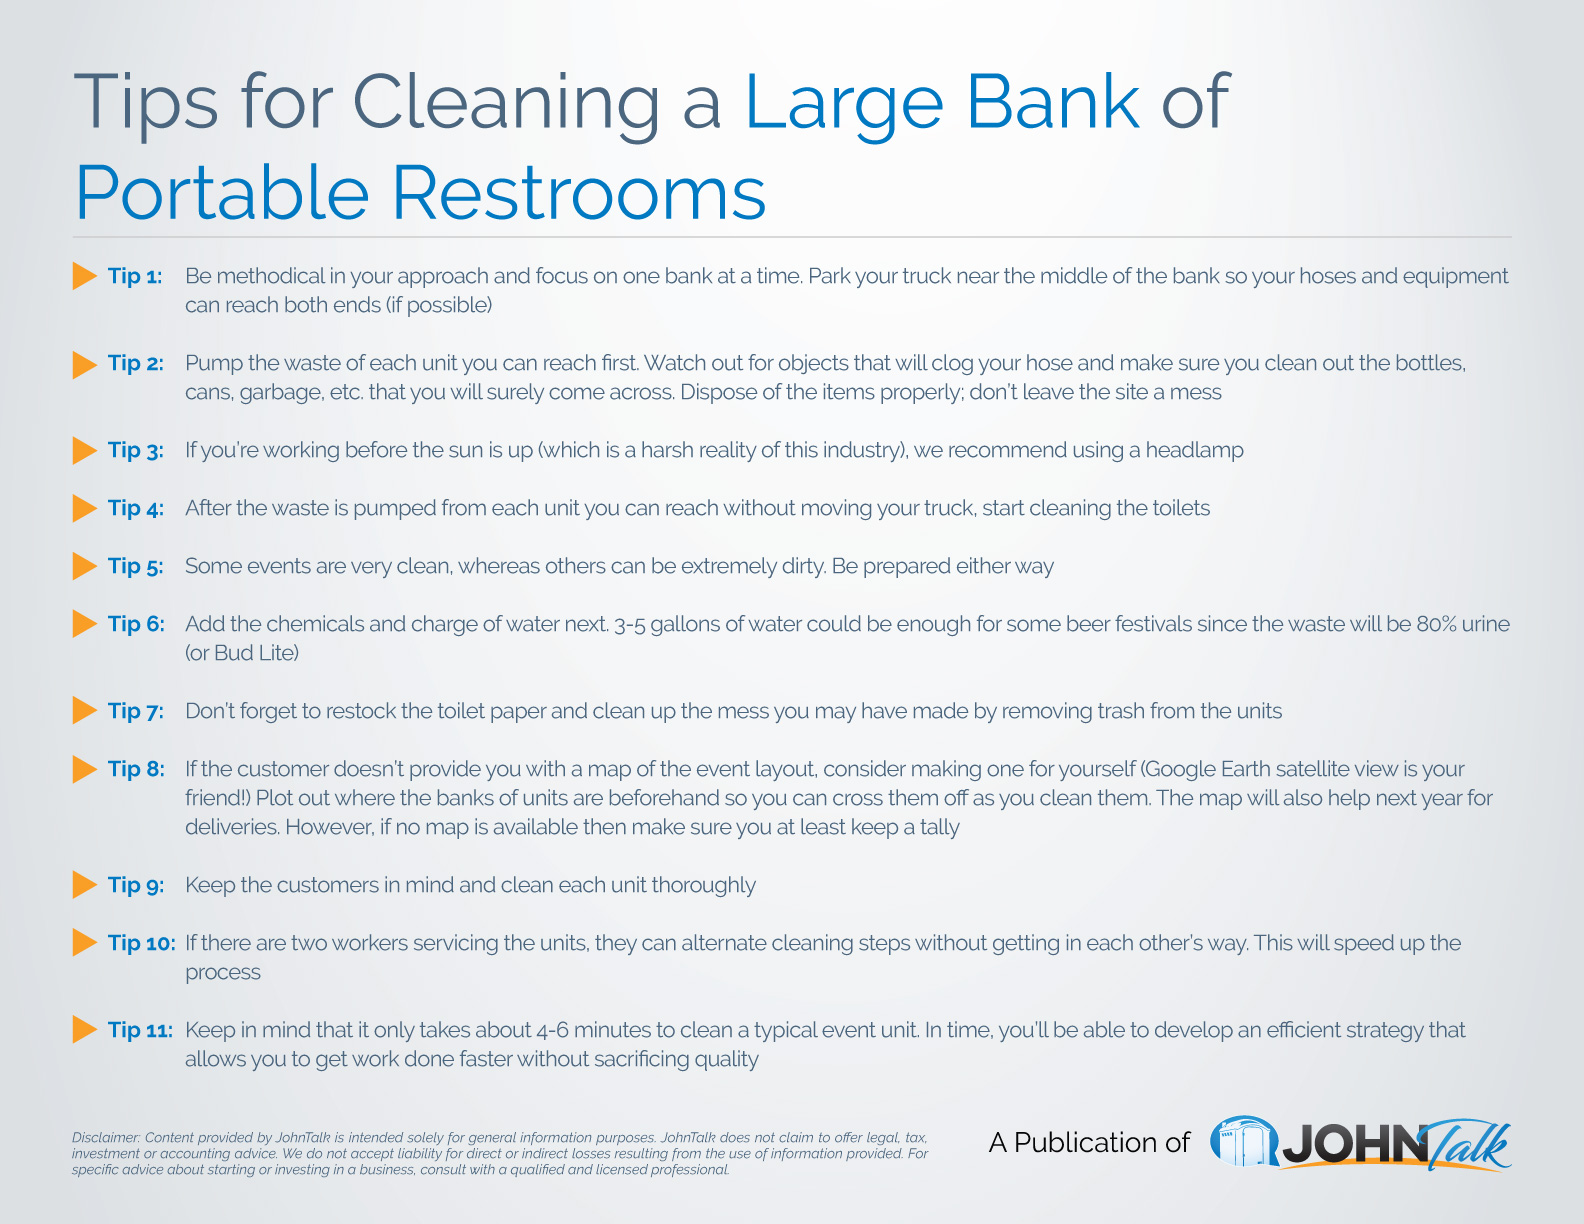 Tips for Cleaning a Large Bank of Portable Restrooms